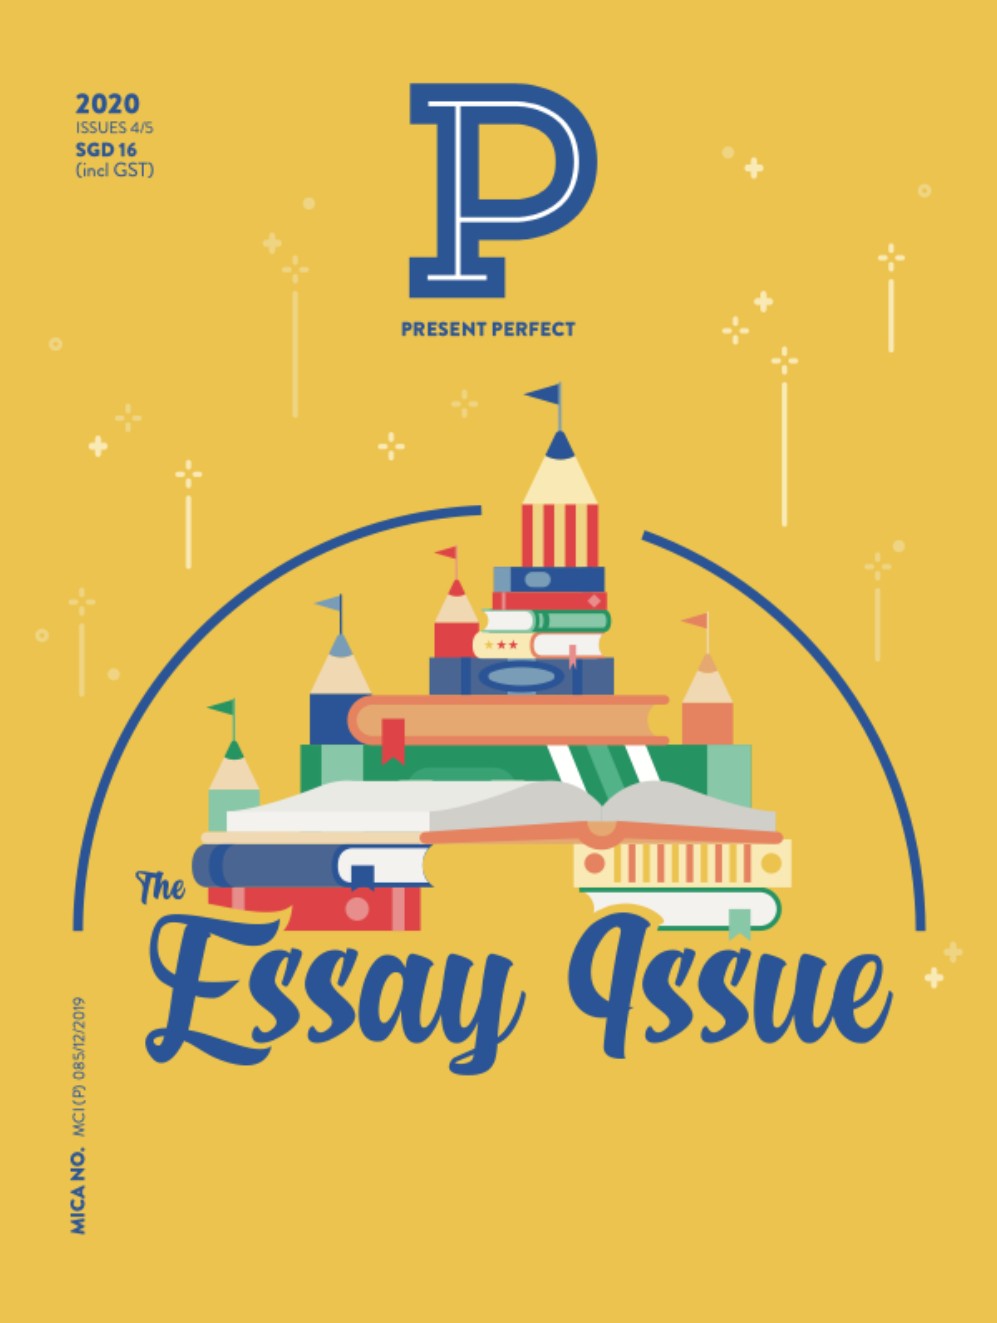 Essay Issue - Present Perfect and Broader Perspective - Assorted Past